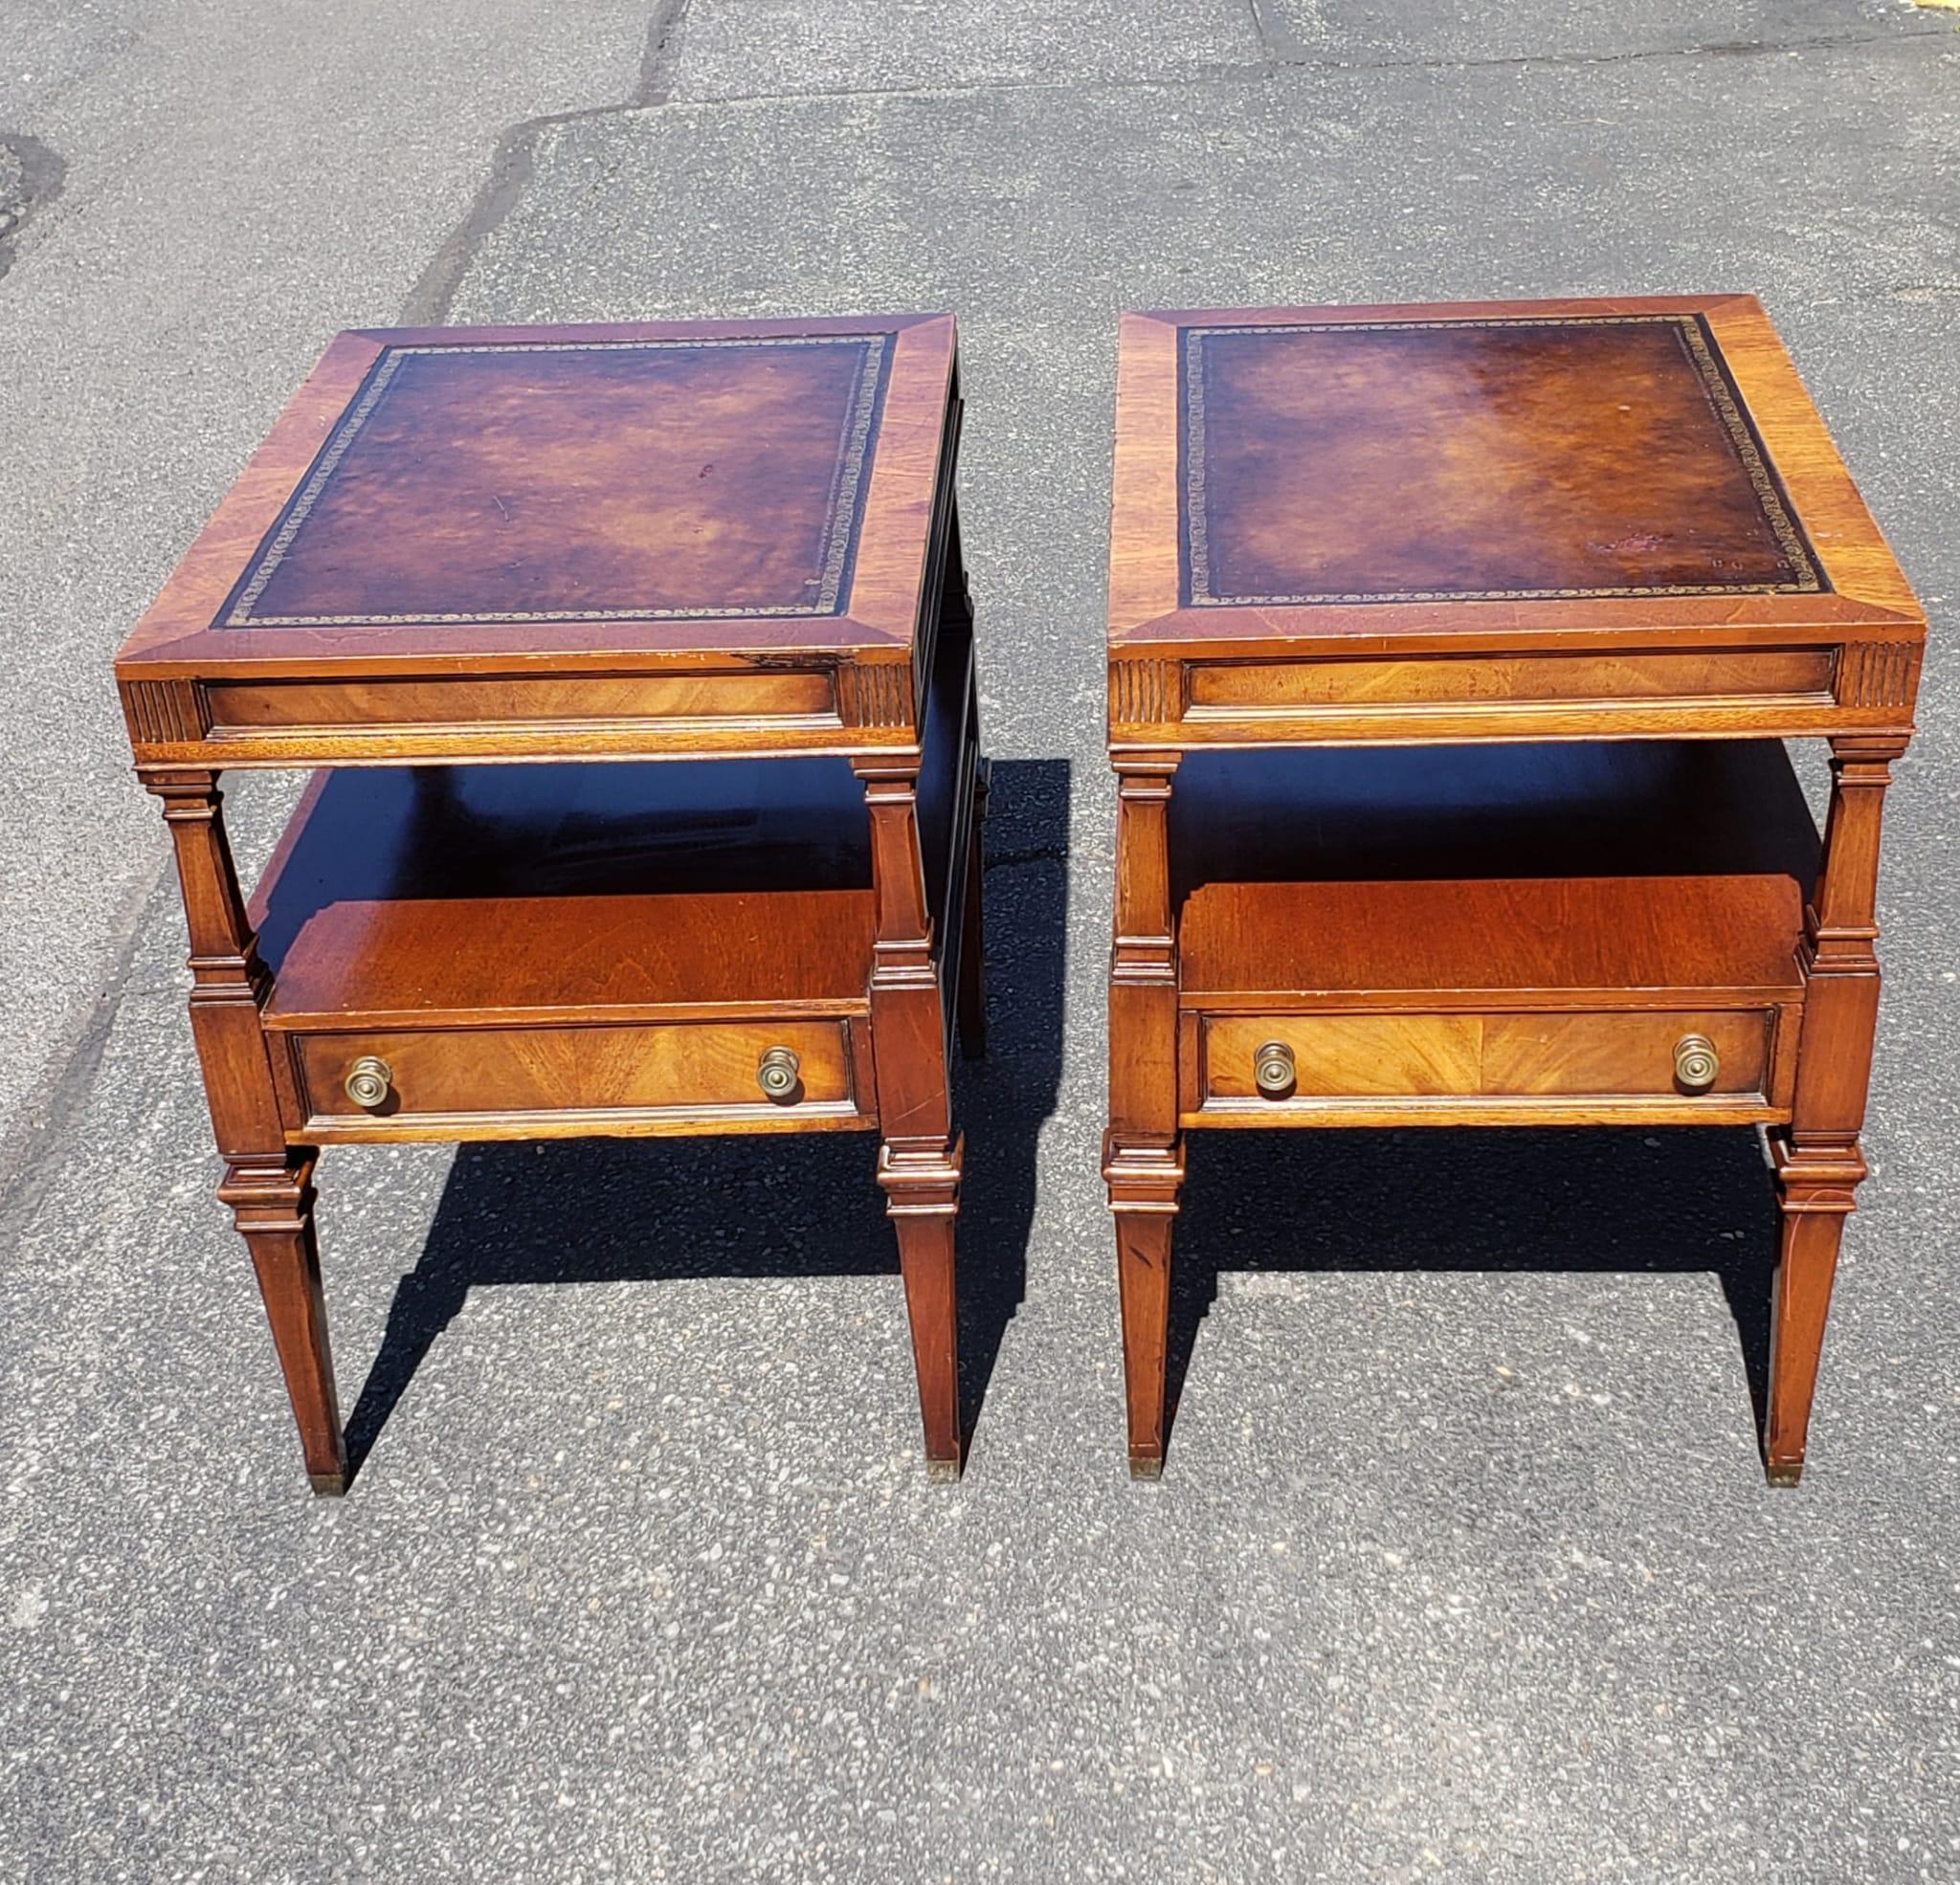 Mid 20th century Weiman Furniture Heirloom two tier Mahogany and Tooled top o e drawer sides table pair. Very good vintage condition.